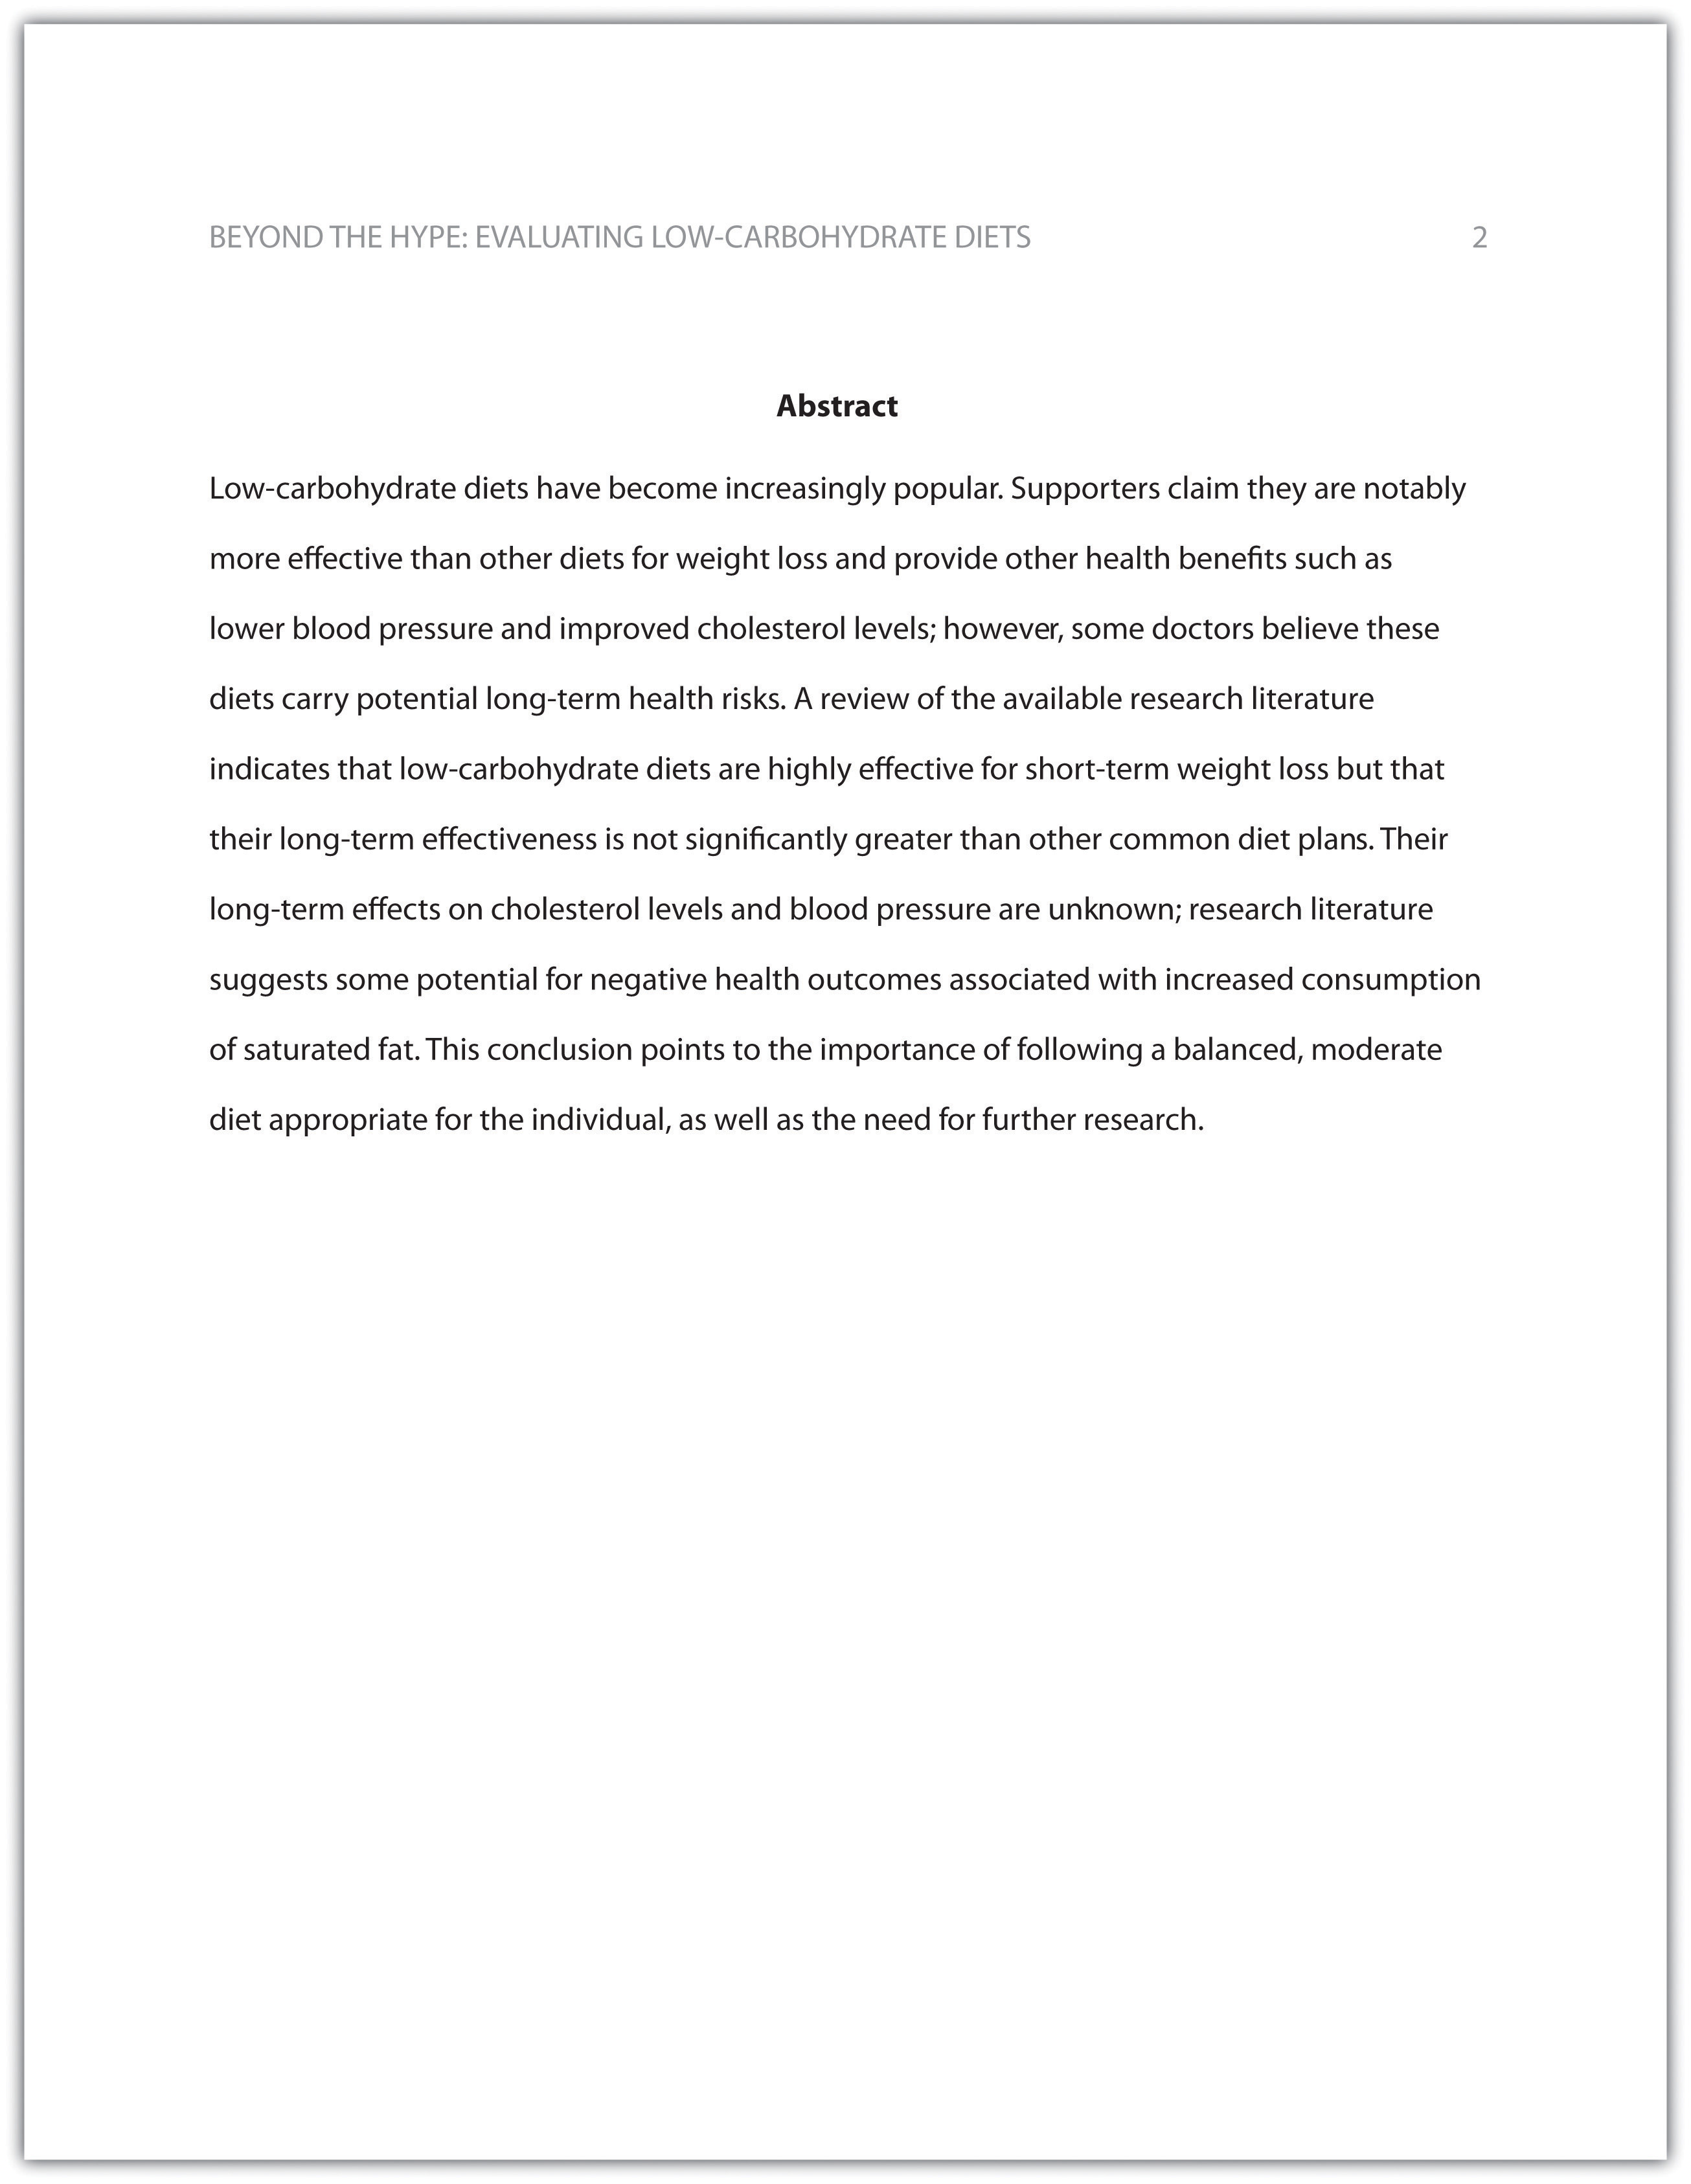 what is the goal of a research paper